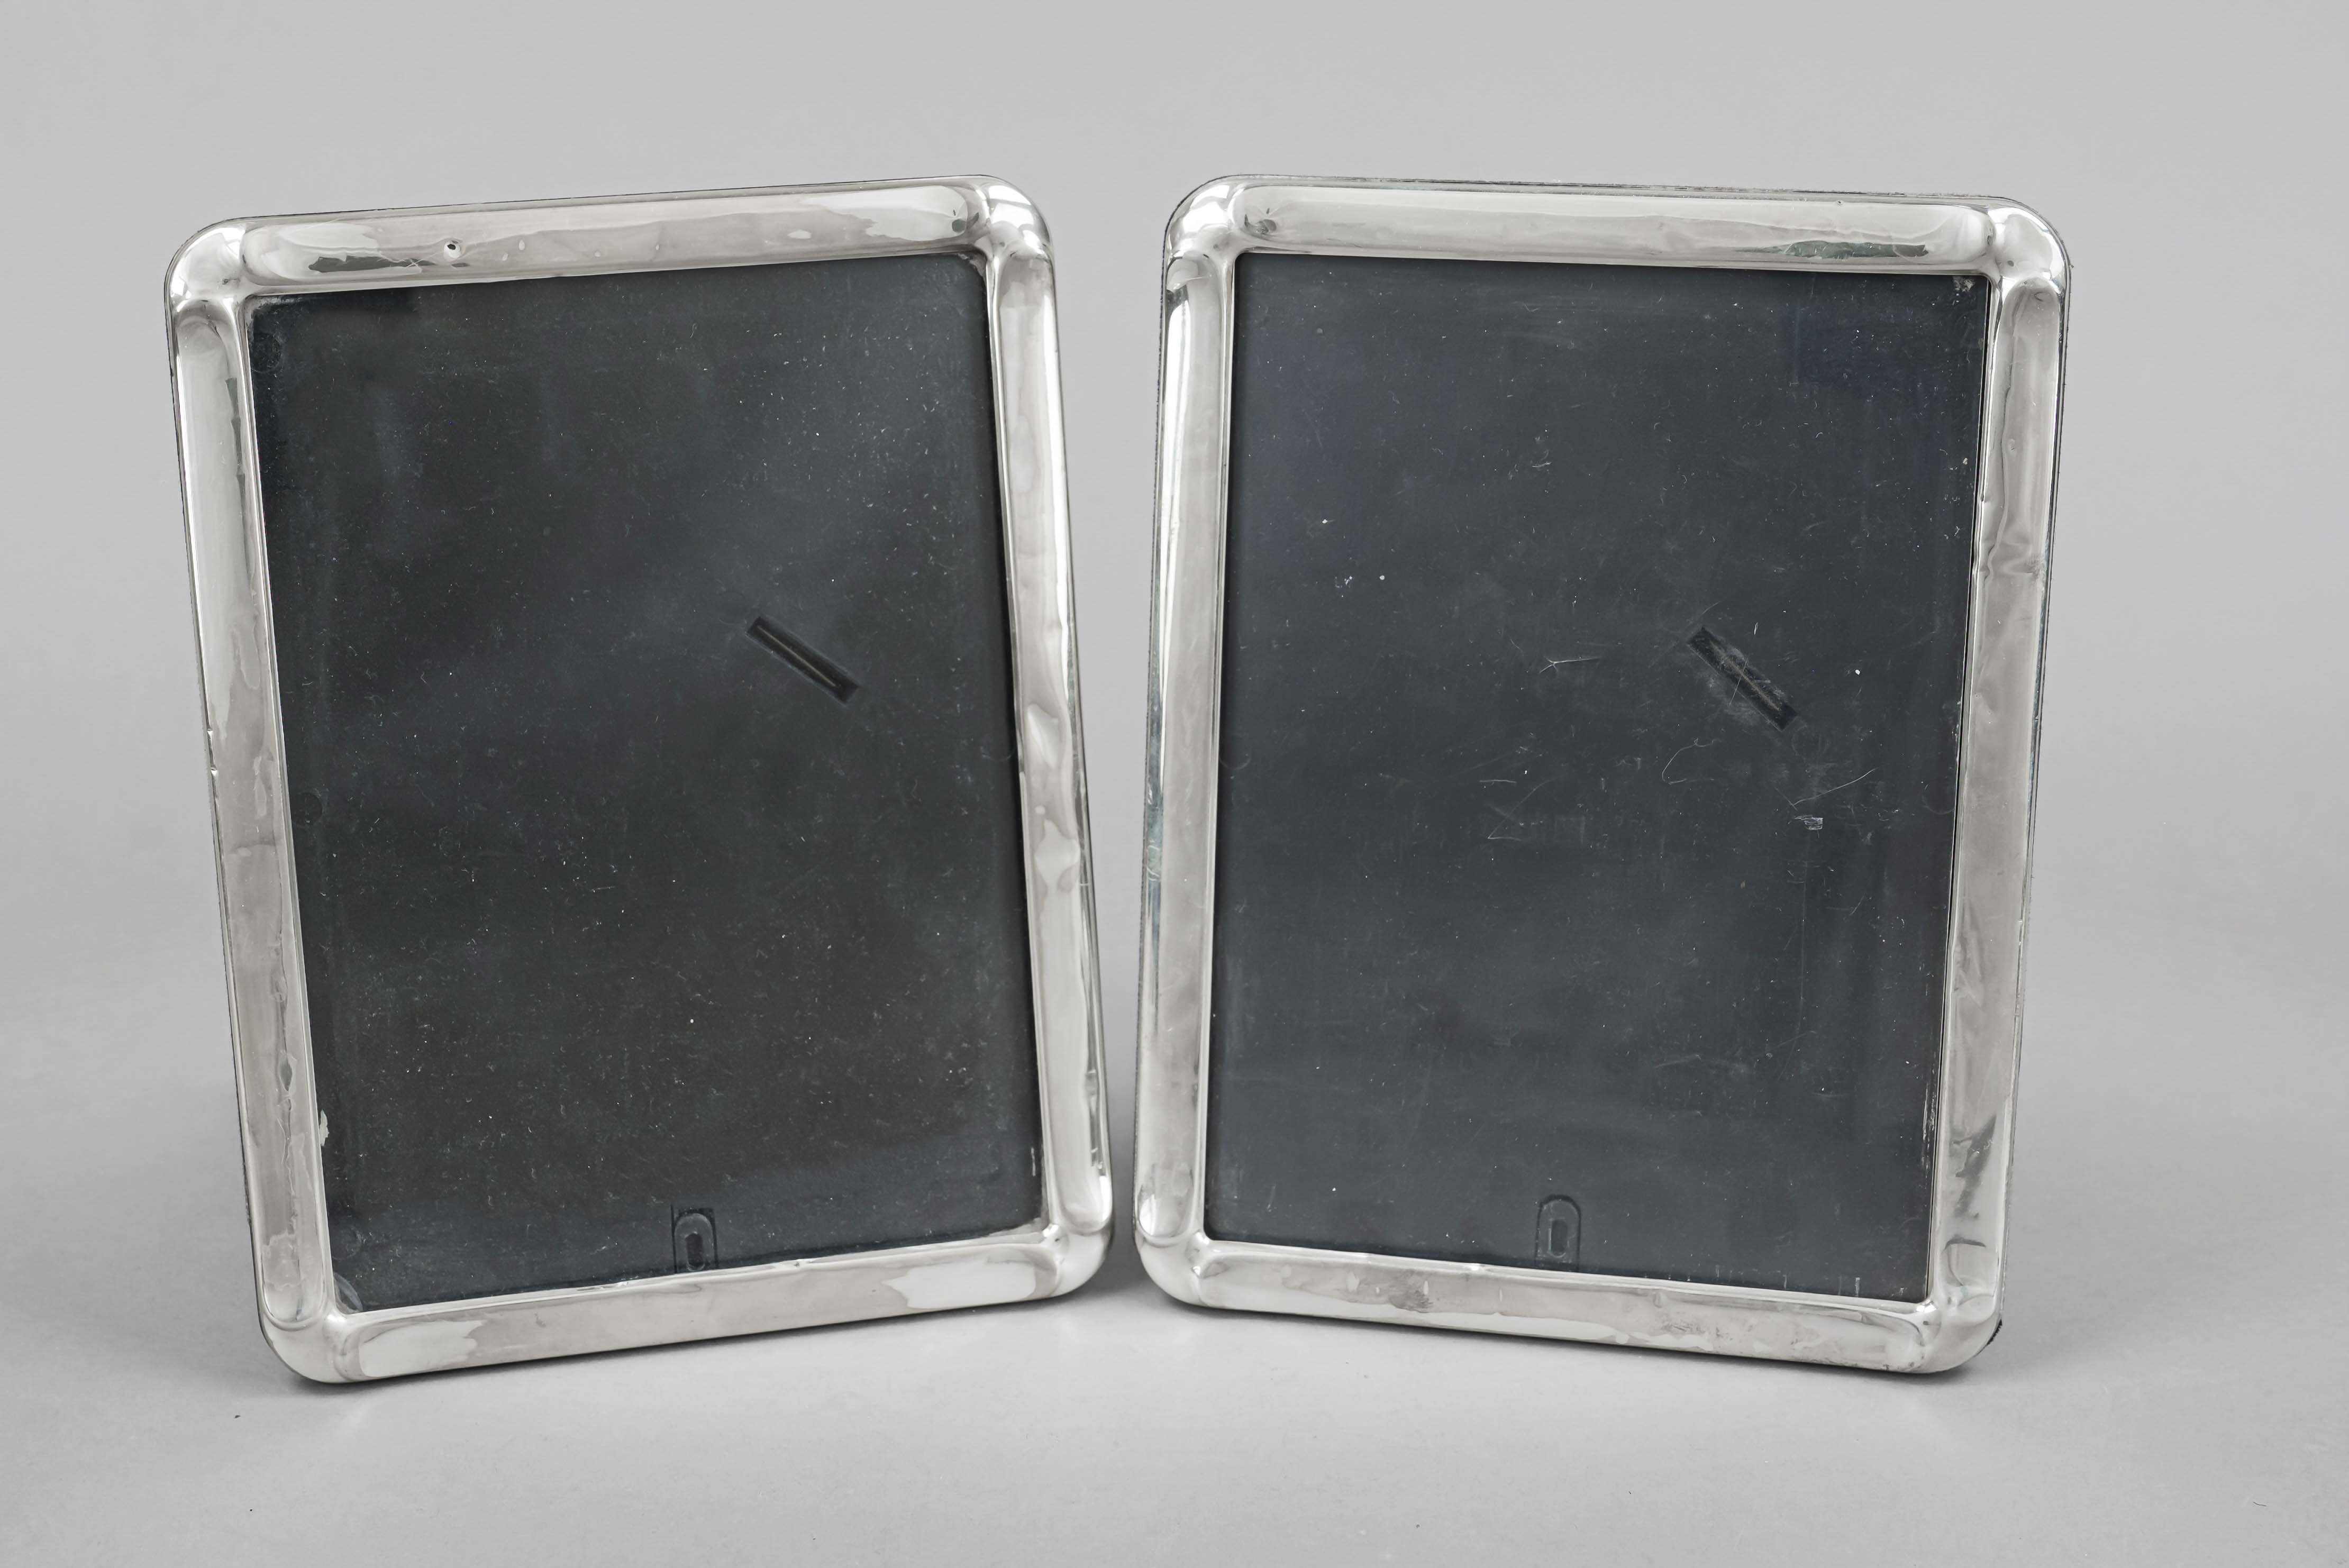 Pair of photo stand frames, 20th century, sterling silver 925/000, smooth form with accentuated